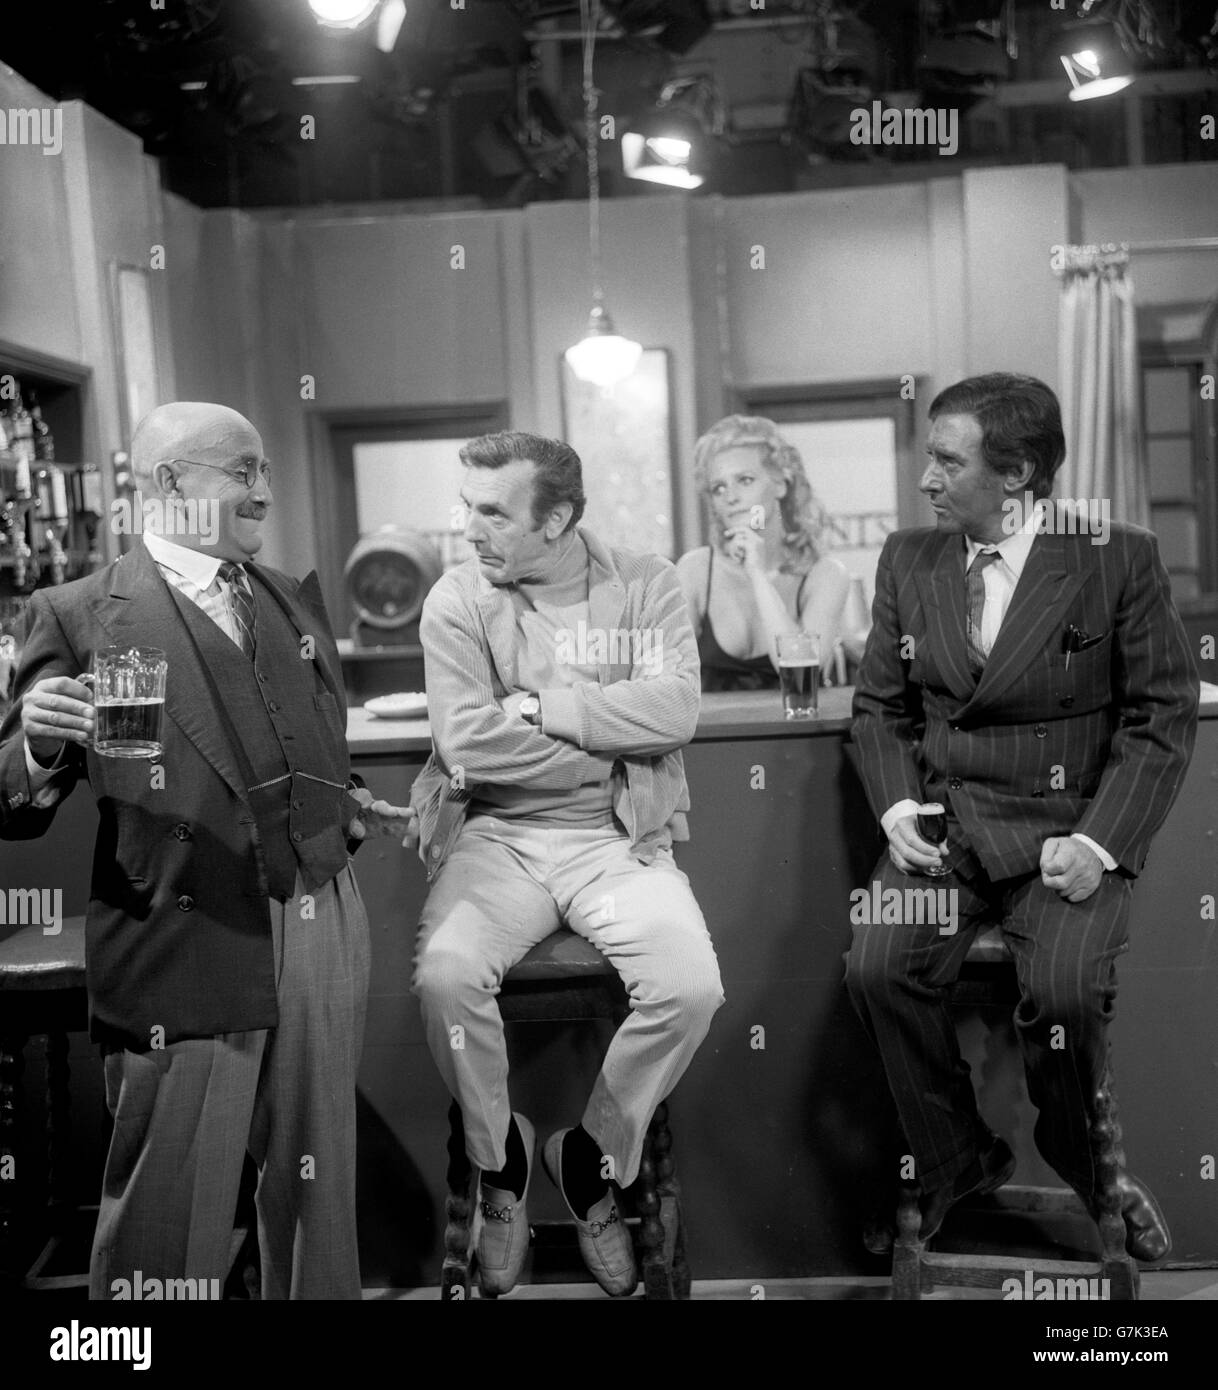 A bald Alf Garnett (Warren Mitchell) with The Foreman (Eric Sykes) and right Paki-Paddy (Spike Milligan) in a discussion on the election campaign during rehearsals for the 25-minute BBC One show called 'Up The Polls', which will be broadcast after the polls close at 10pm. Listening in to the discussion is actress Lorna Wile, who plays a barmaid. Stock Photo